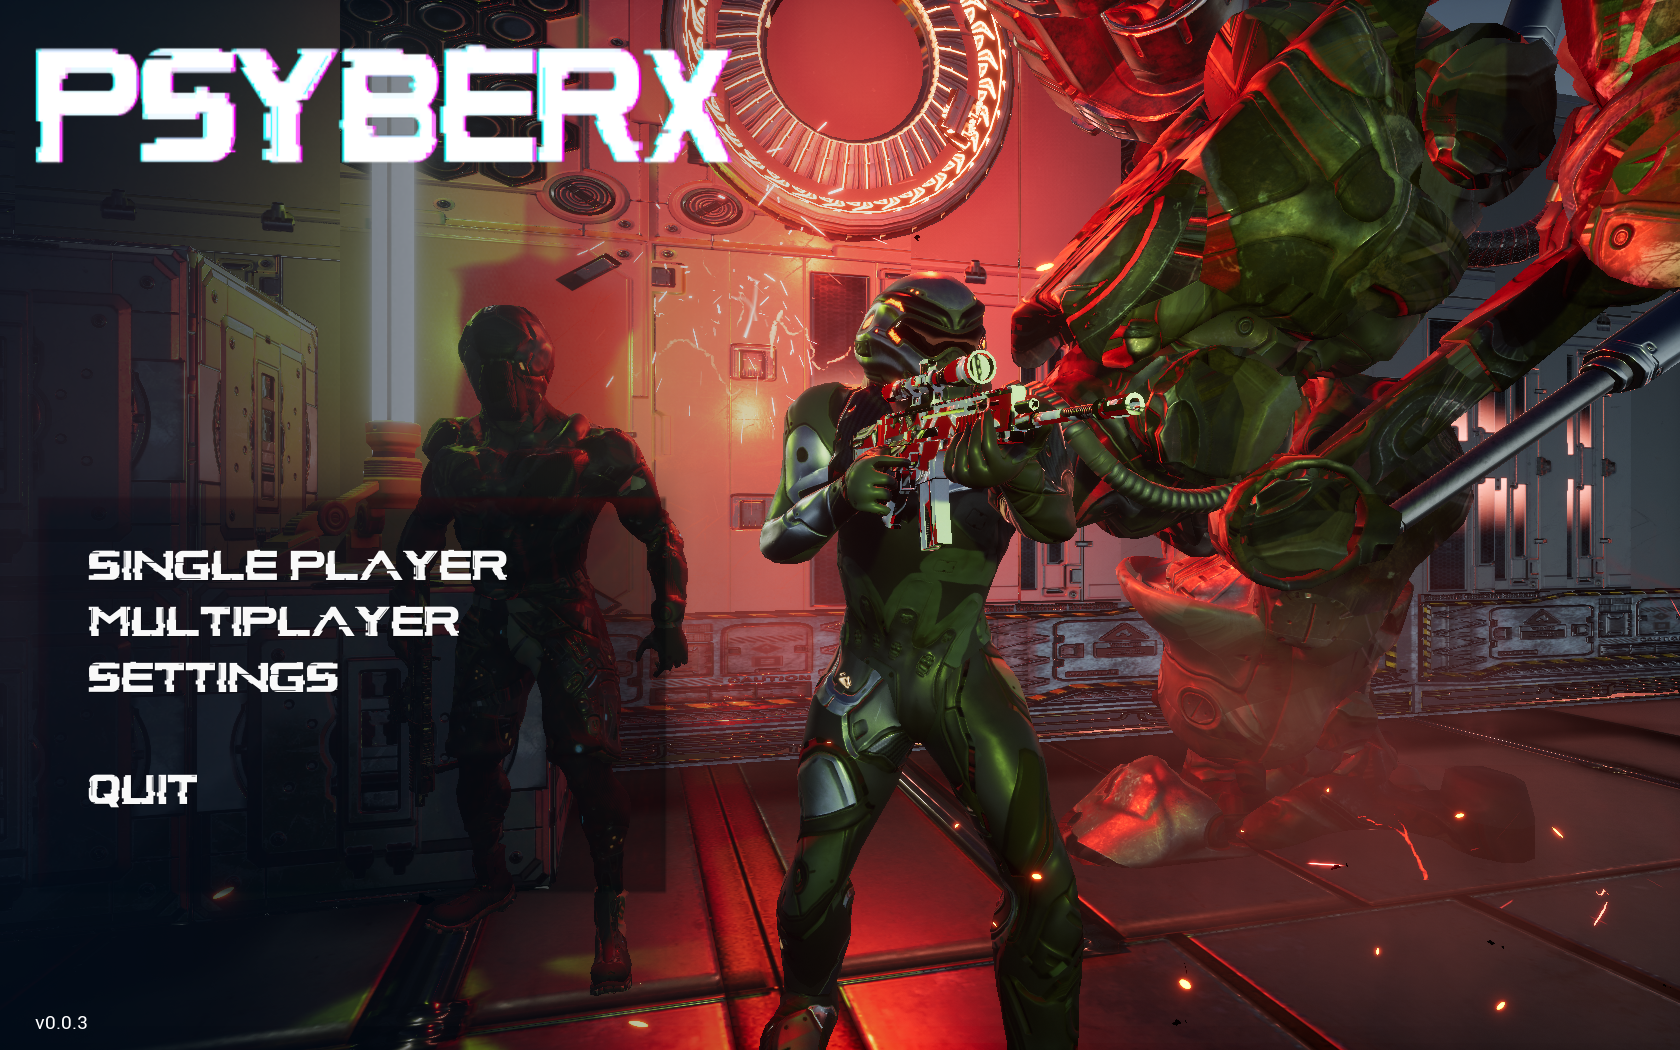 @psyberx/psyber-x-official-game-trailer-now-with-in-game-footage